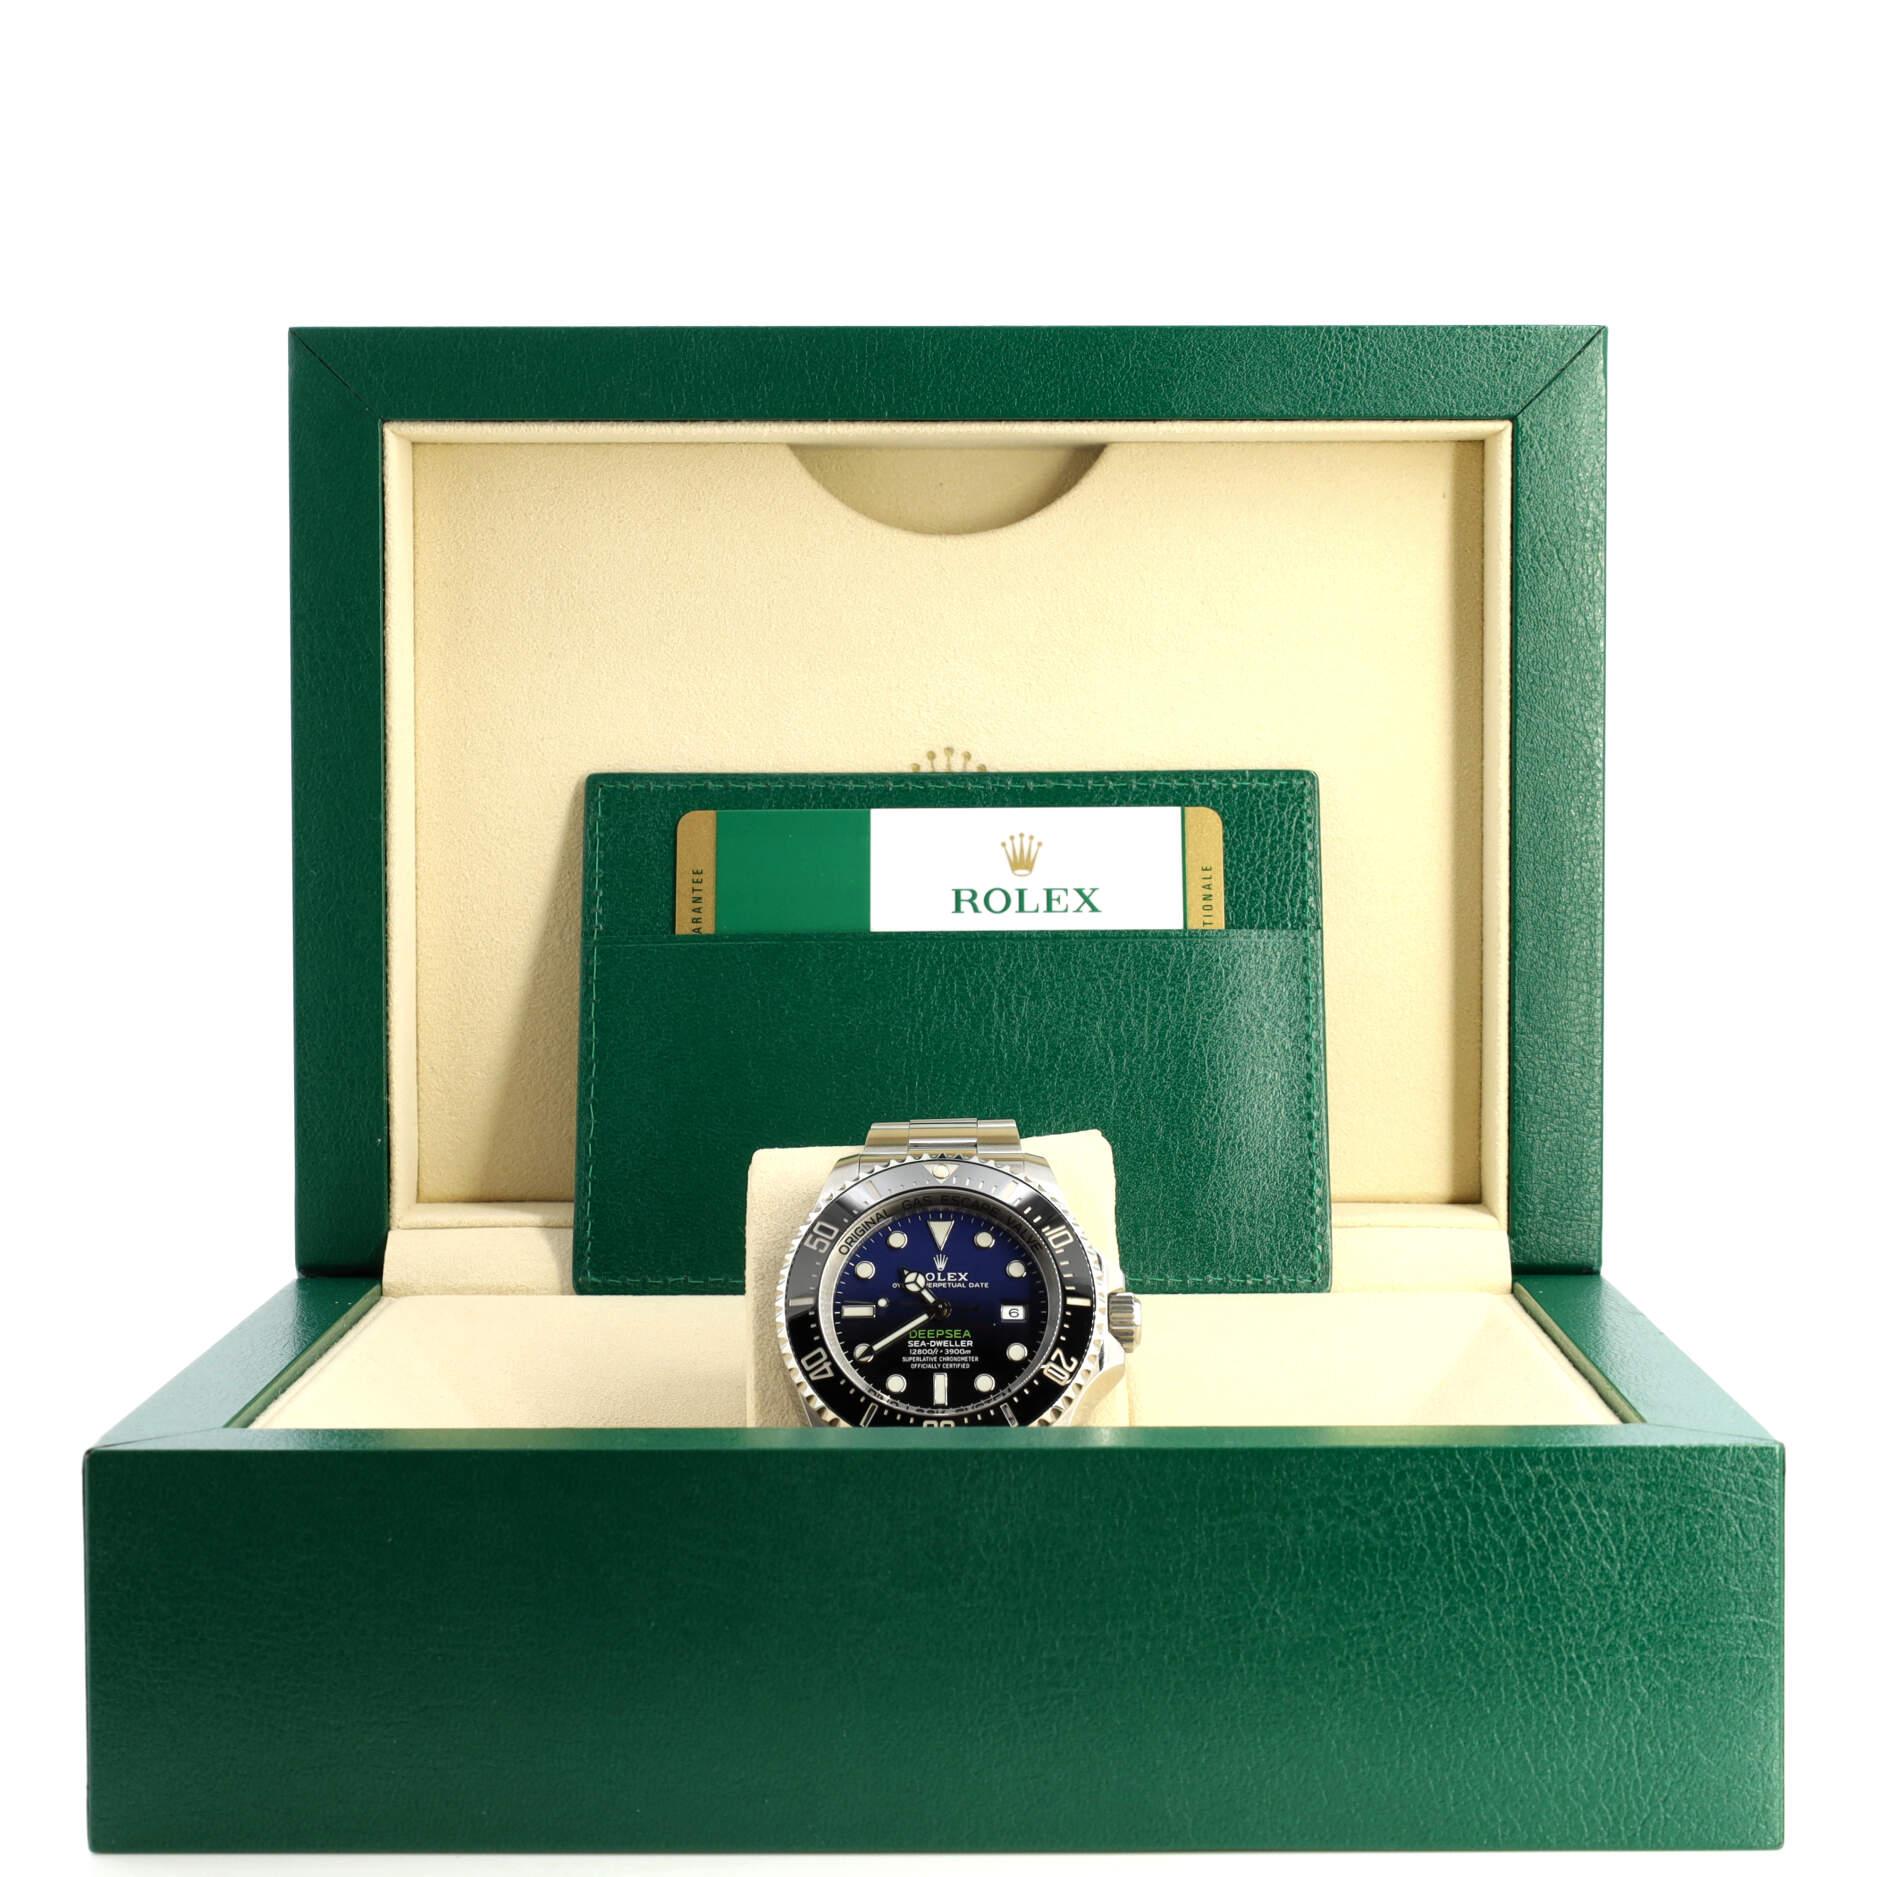 Condition: Great. Minor wear and scratches throughout.
Accessories: Box, Warranty Card - Dated, Instruction Booklet
Measurements: Case Size/Width: 44mm, Watch Height: 18mm, Band Width: 22mm, Wrist circumference: 6.25